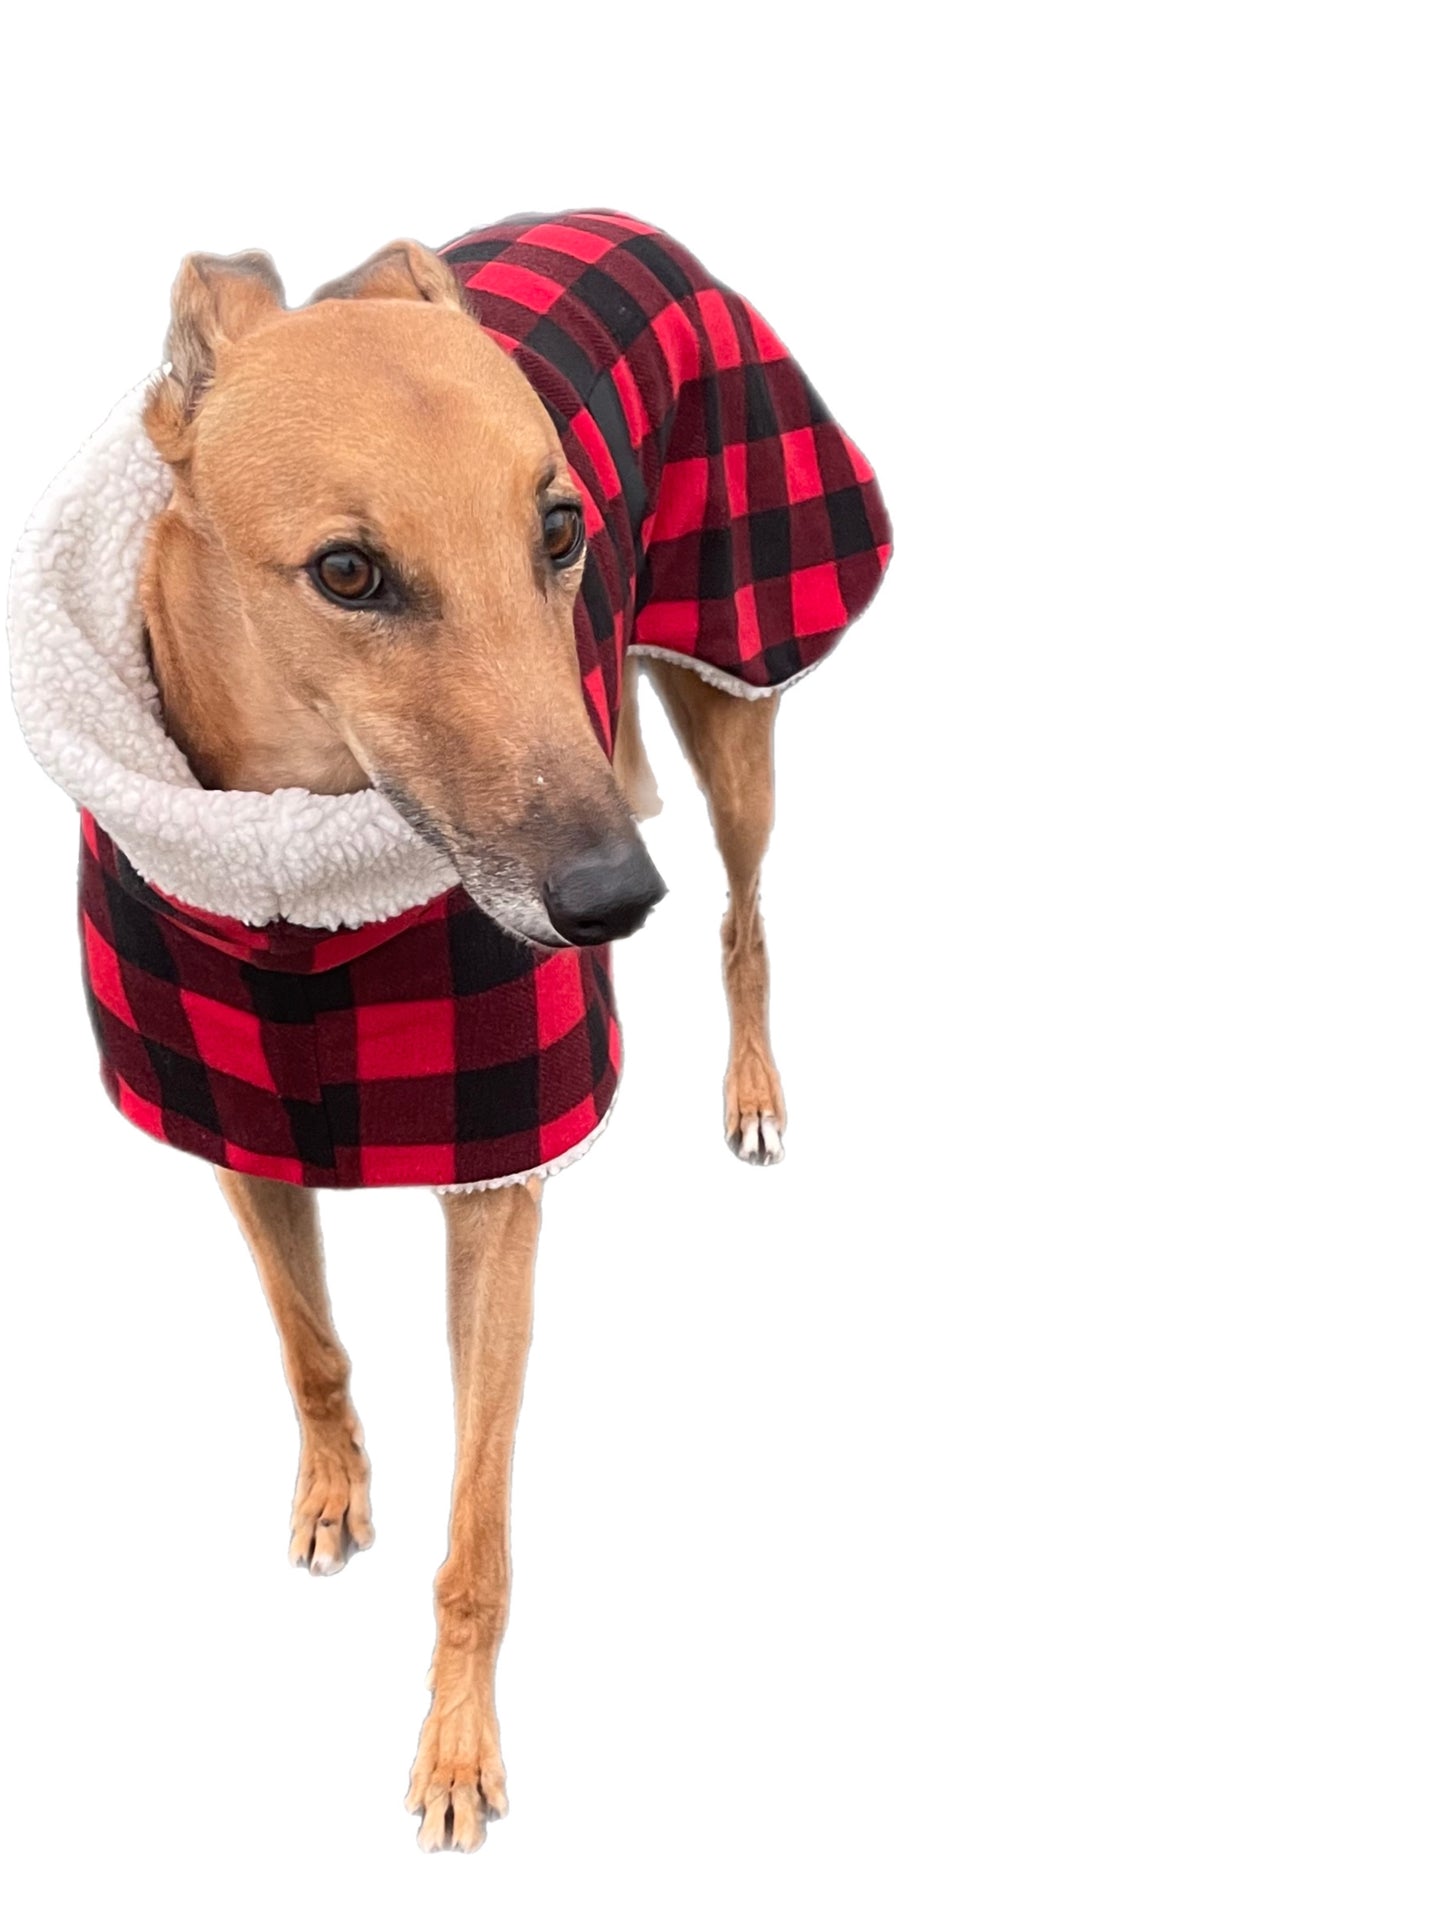 The red Lumberjack Greyhound coat in deluxe style rug red black tartan check  polar fleece washable extra wide neck